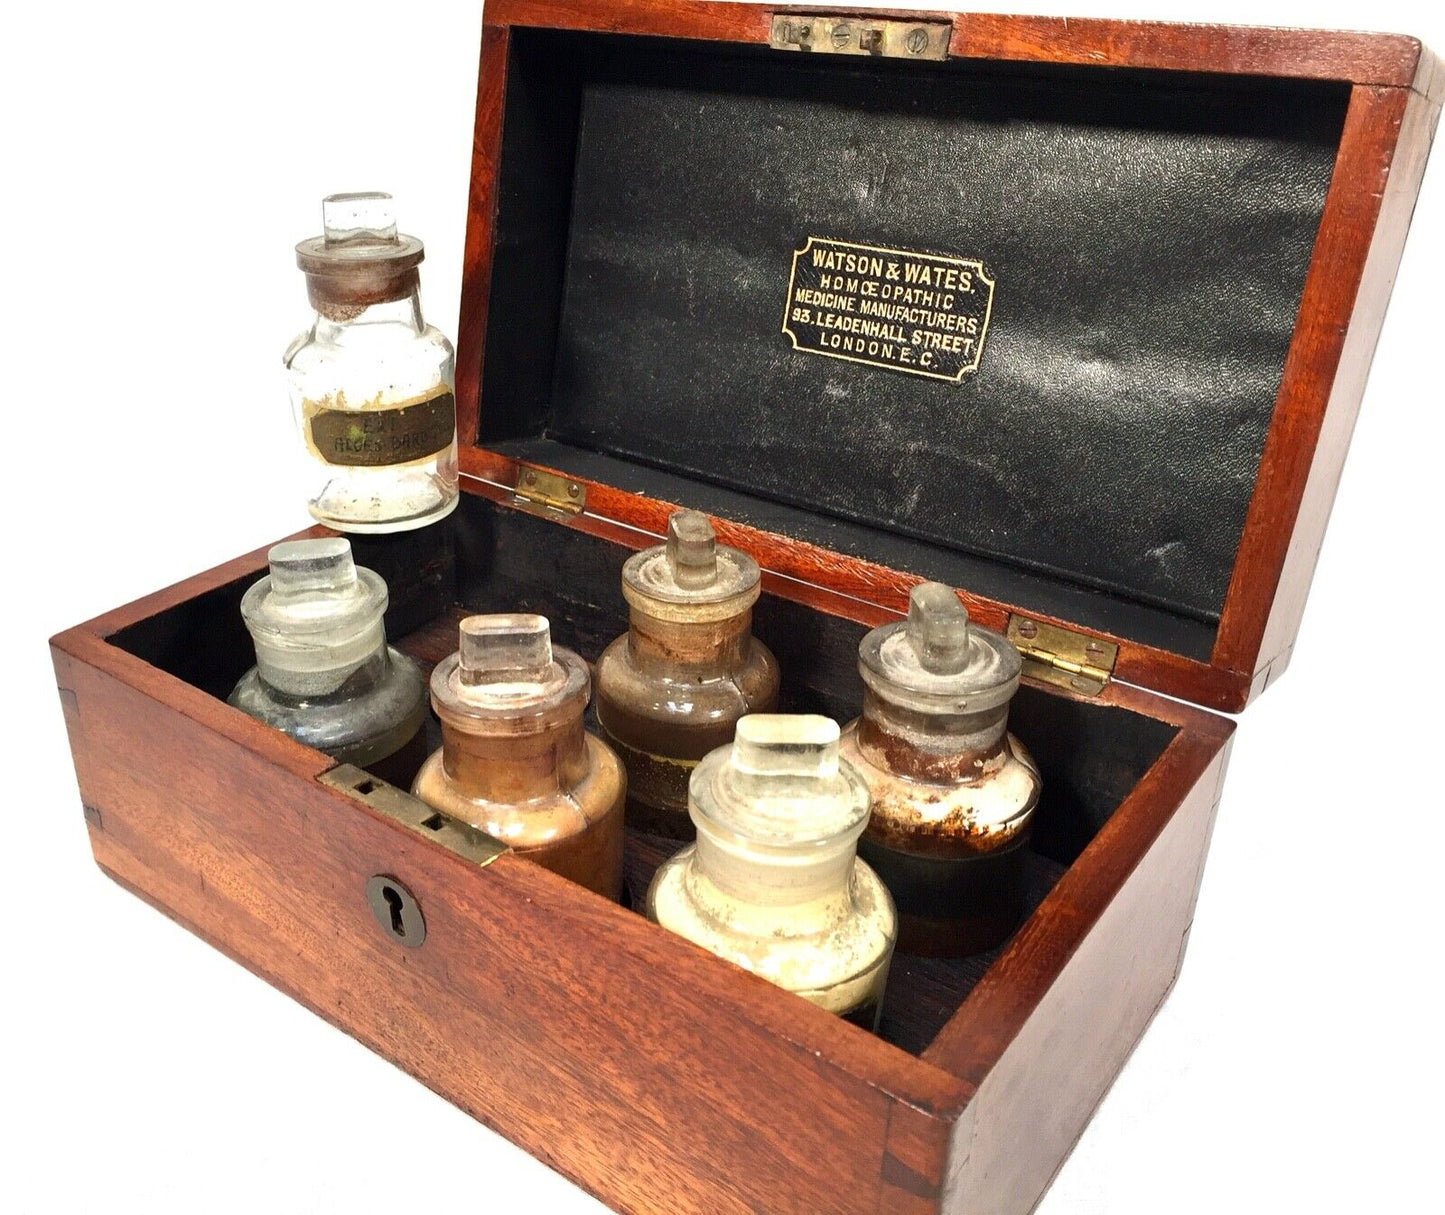 Antique Mahogany Apothecary Box / Cabinet With Glass Bottles by Watson & Wates